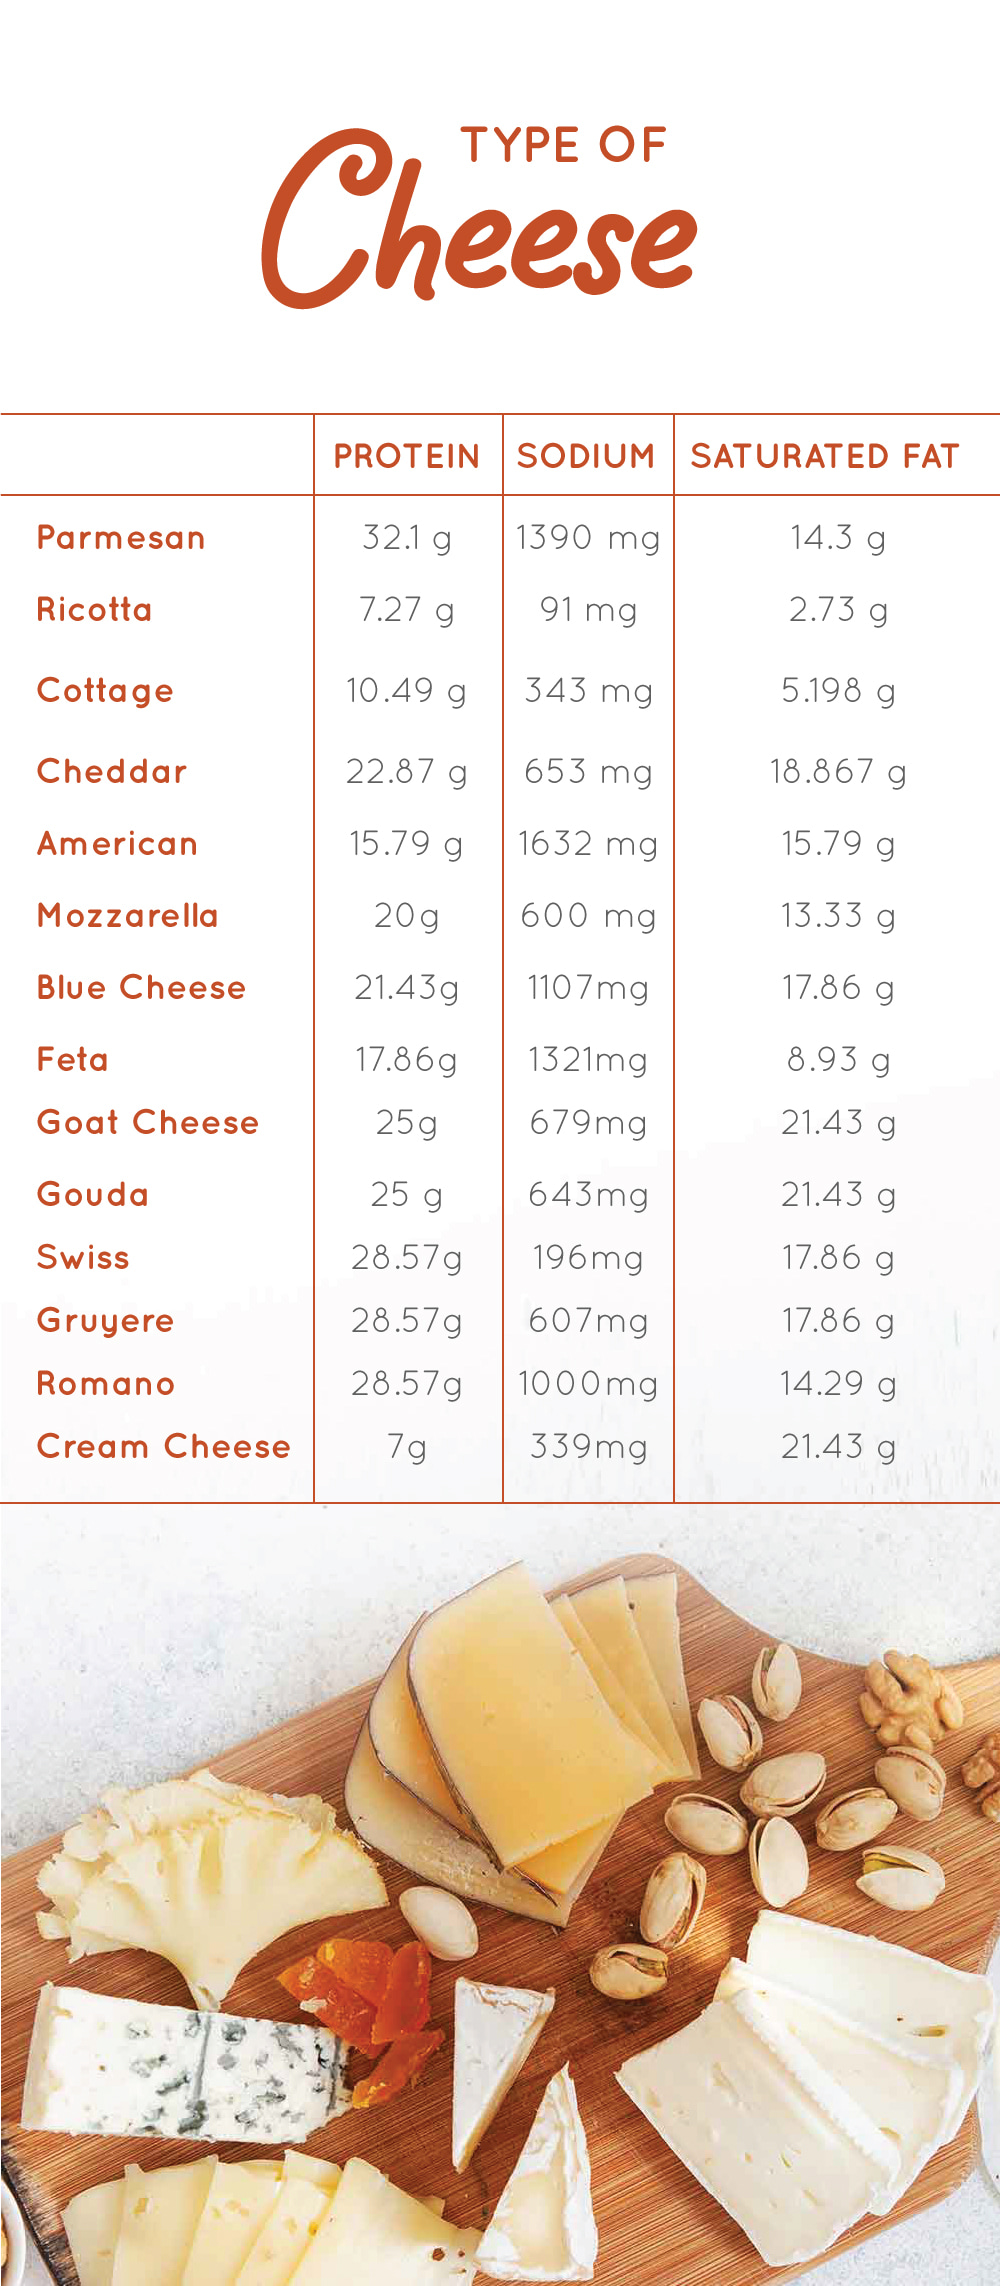 Your Guide to Choosing the Right Cheese